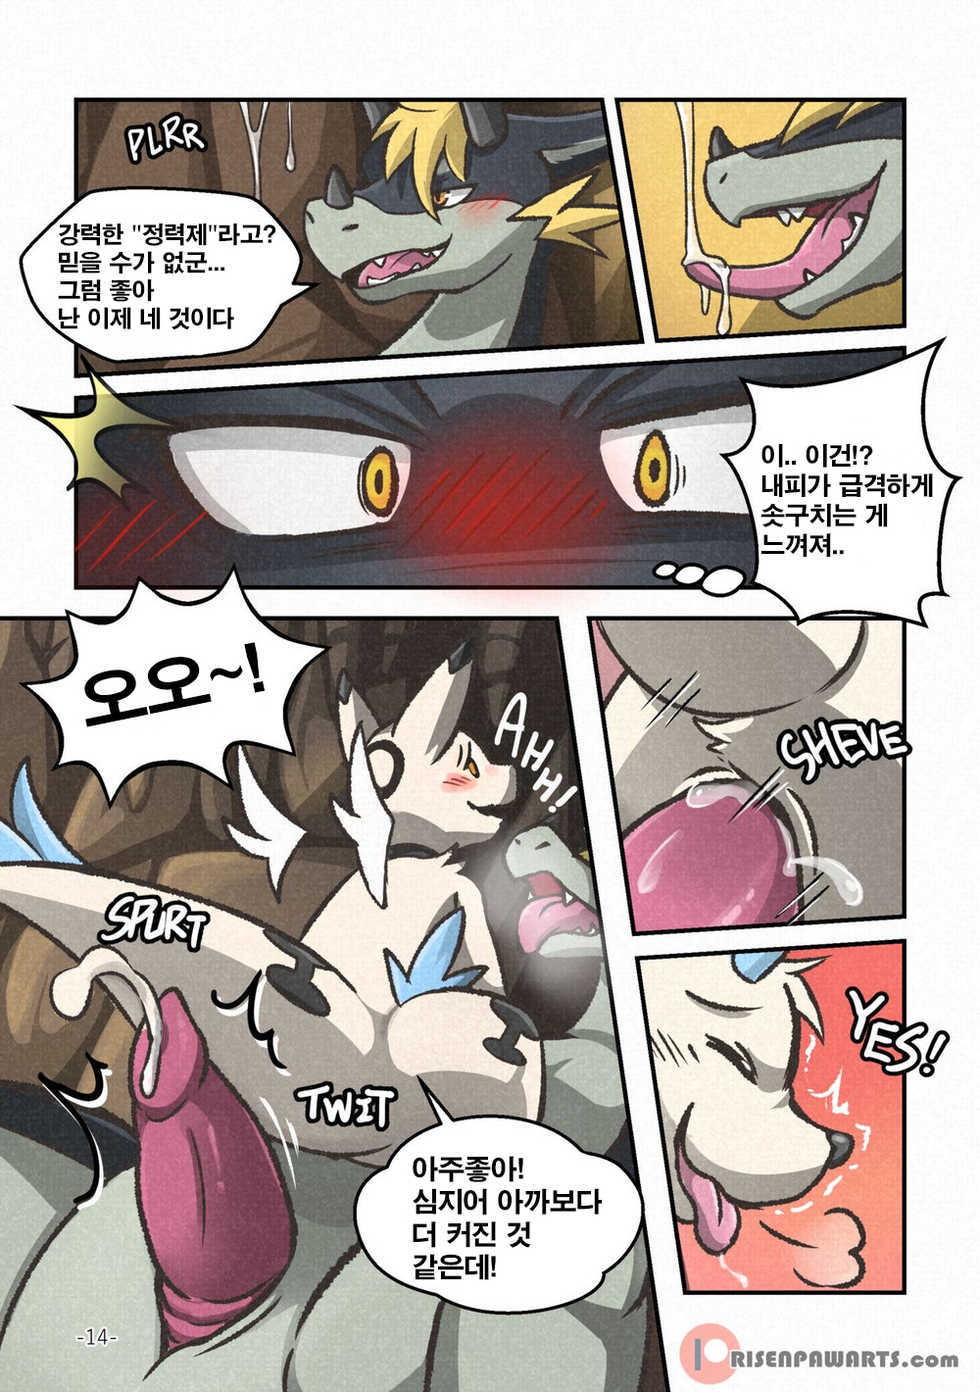 [Risenpaw] Out of Control │통제 불능 - Page 13